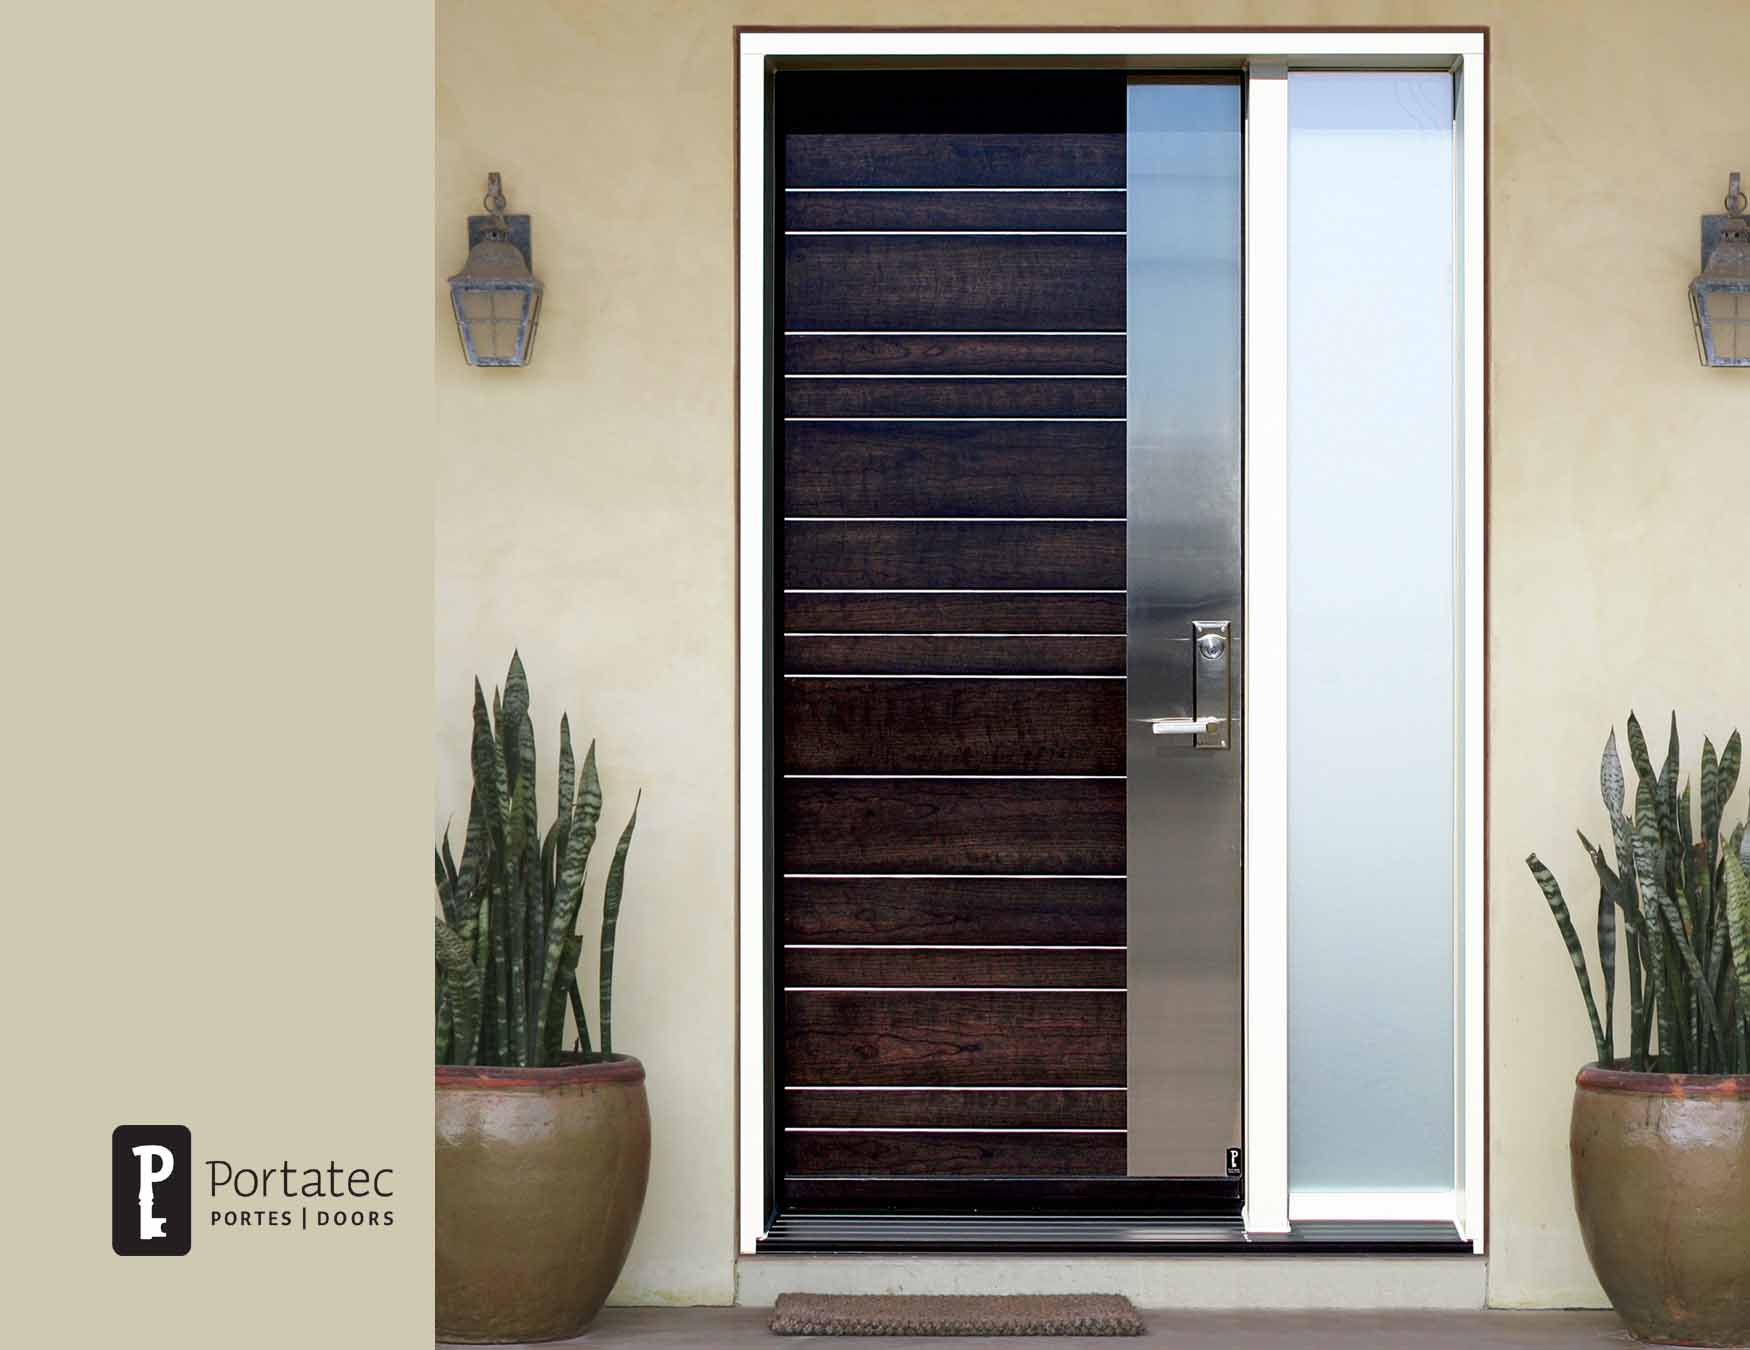 CONTEMPORARY FRONT ENTRY DOOR SYSTEMS AT S.I.S.